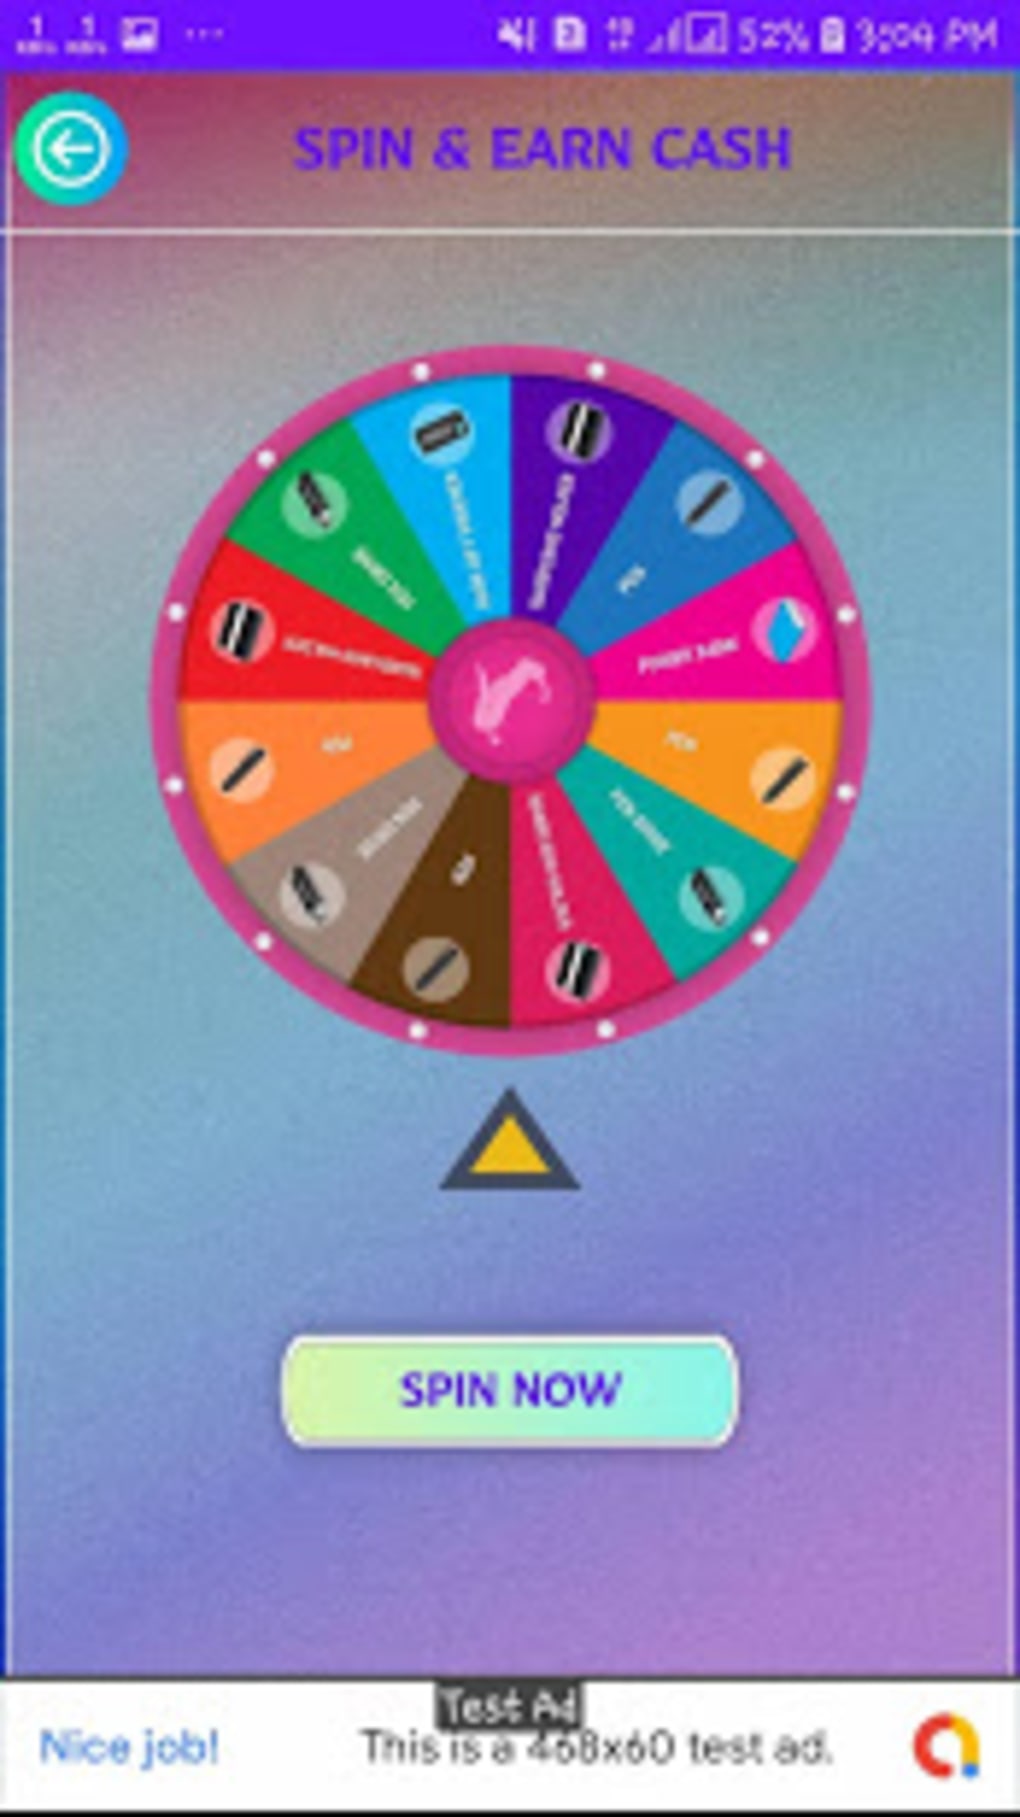 spin to win real money apk download